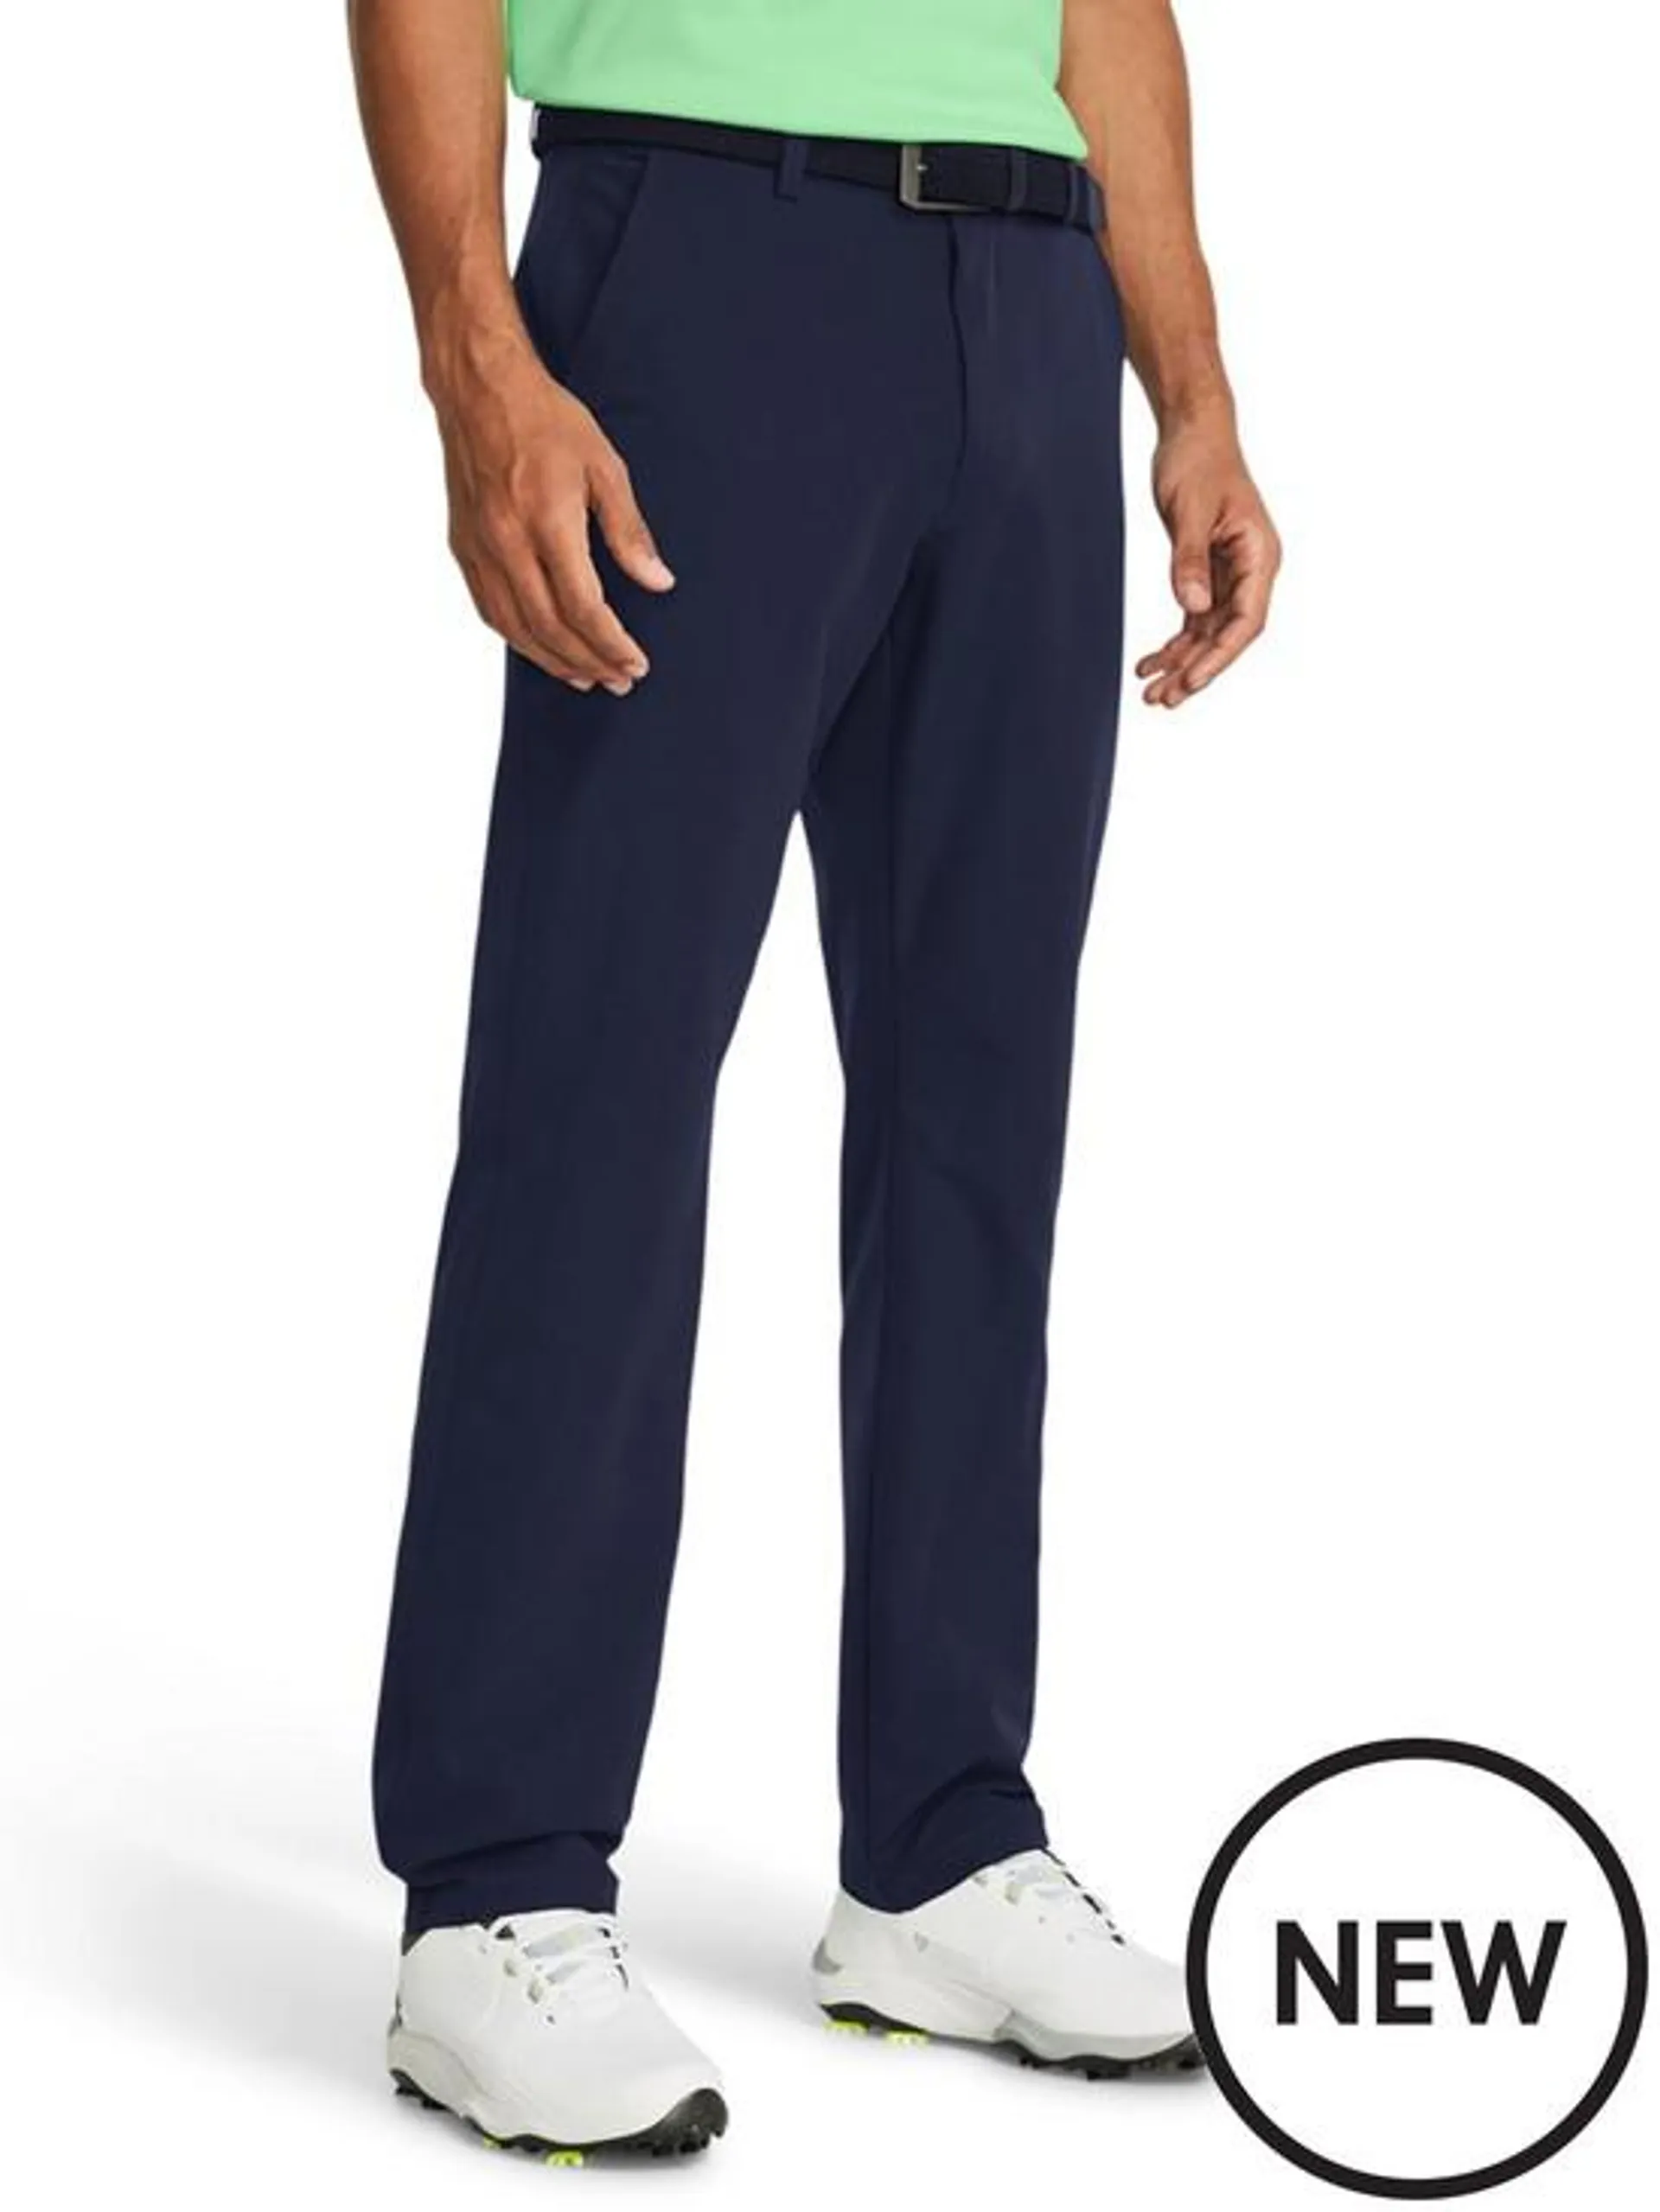 Mens Golf Tech Tapered Trousers - Navy